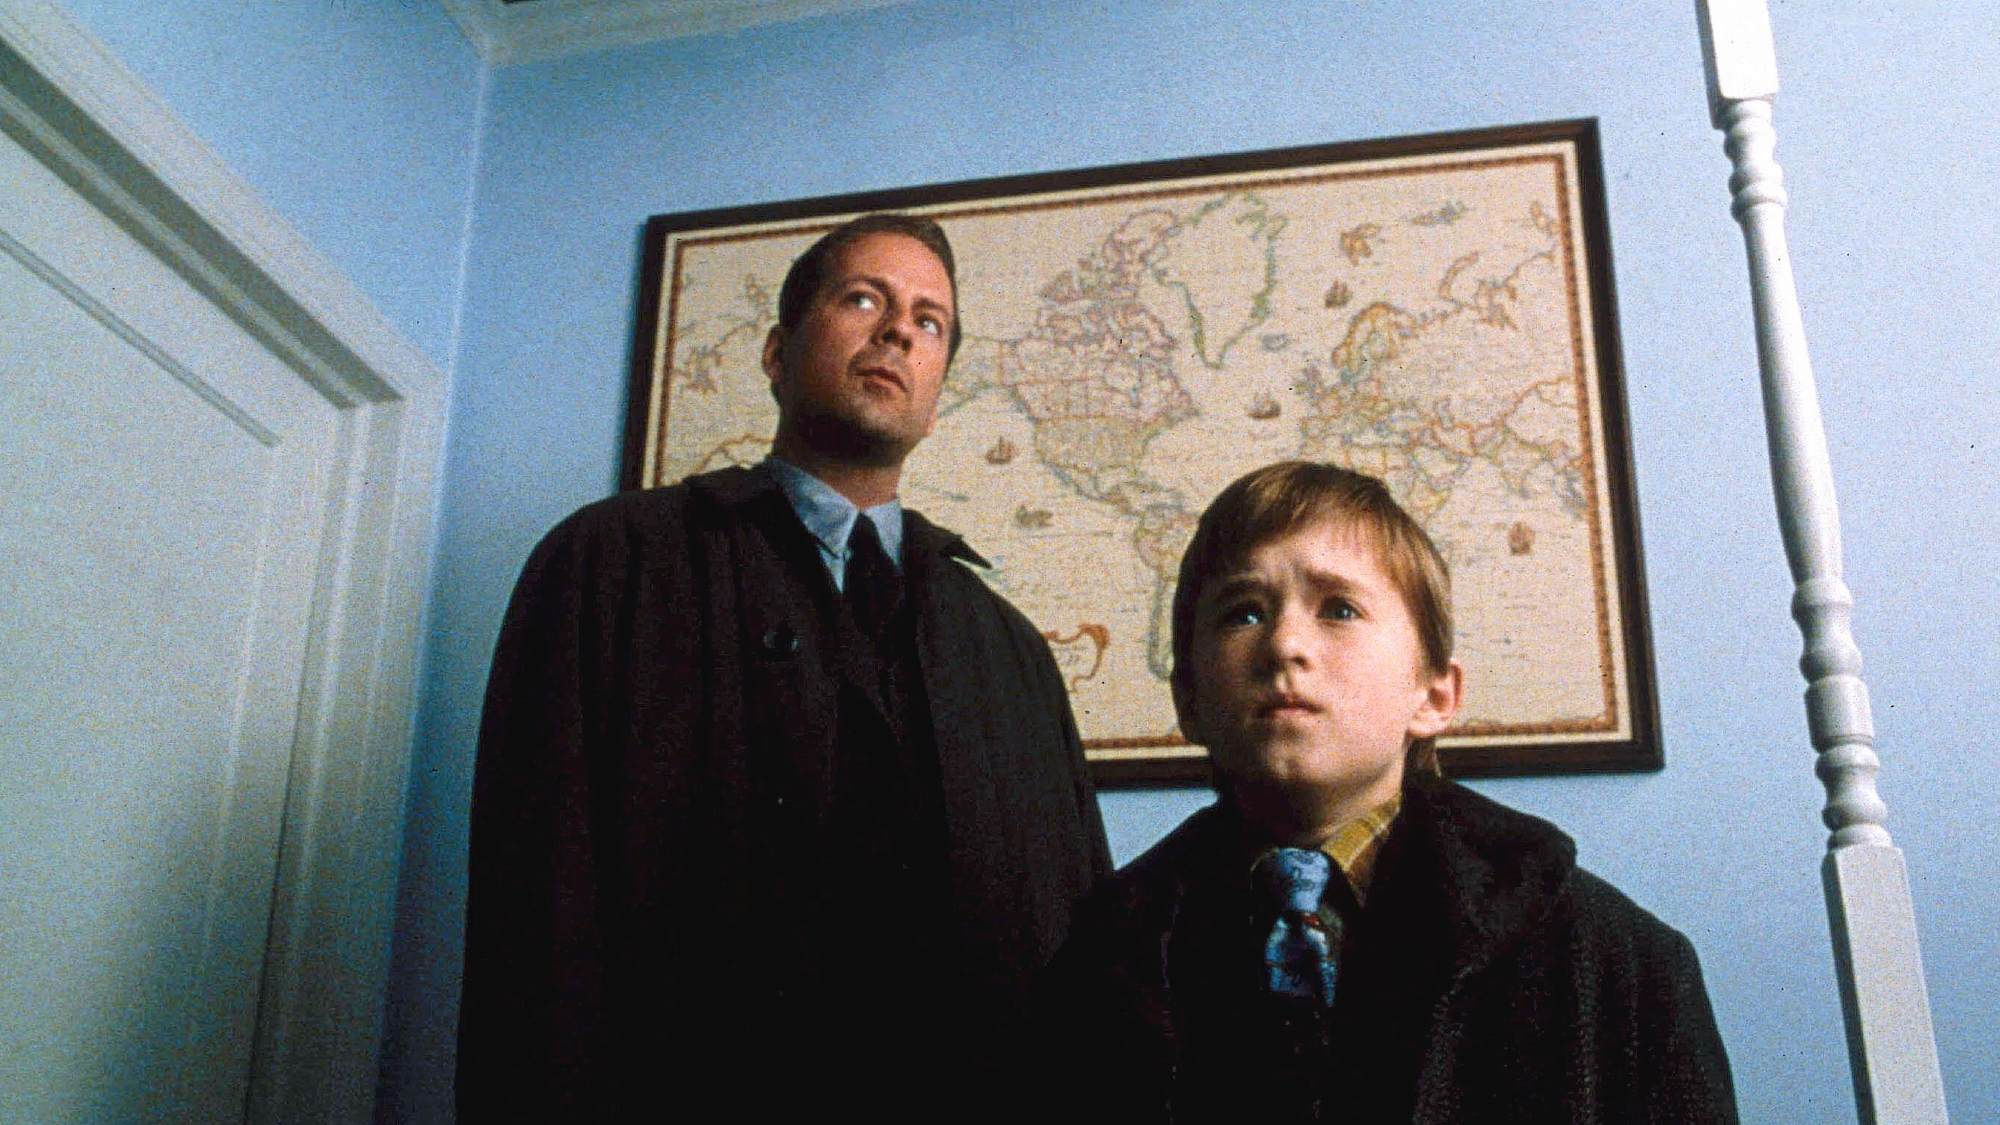 Bruce Willis and Haley Joel Osment in The Sixth Sense